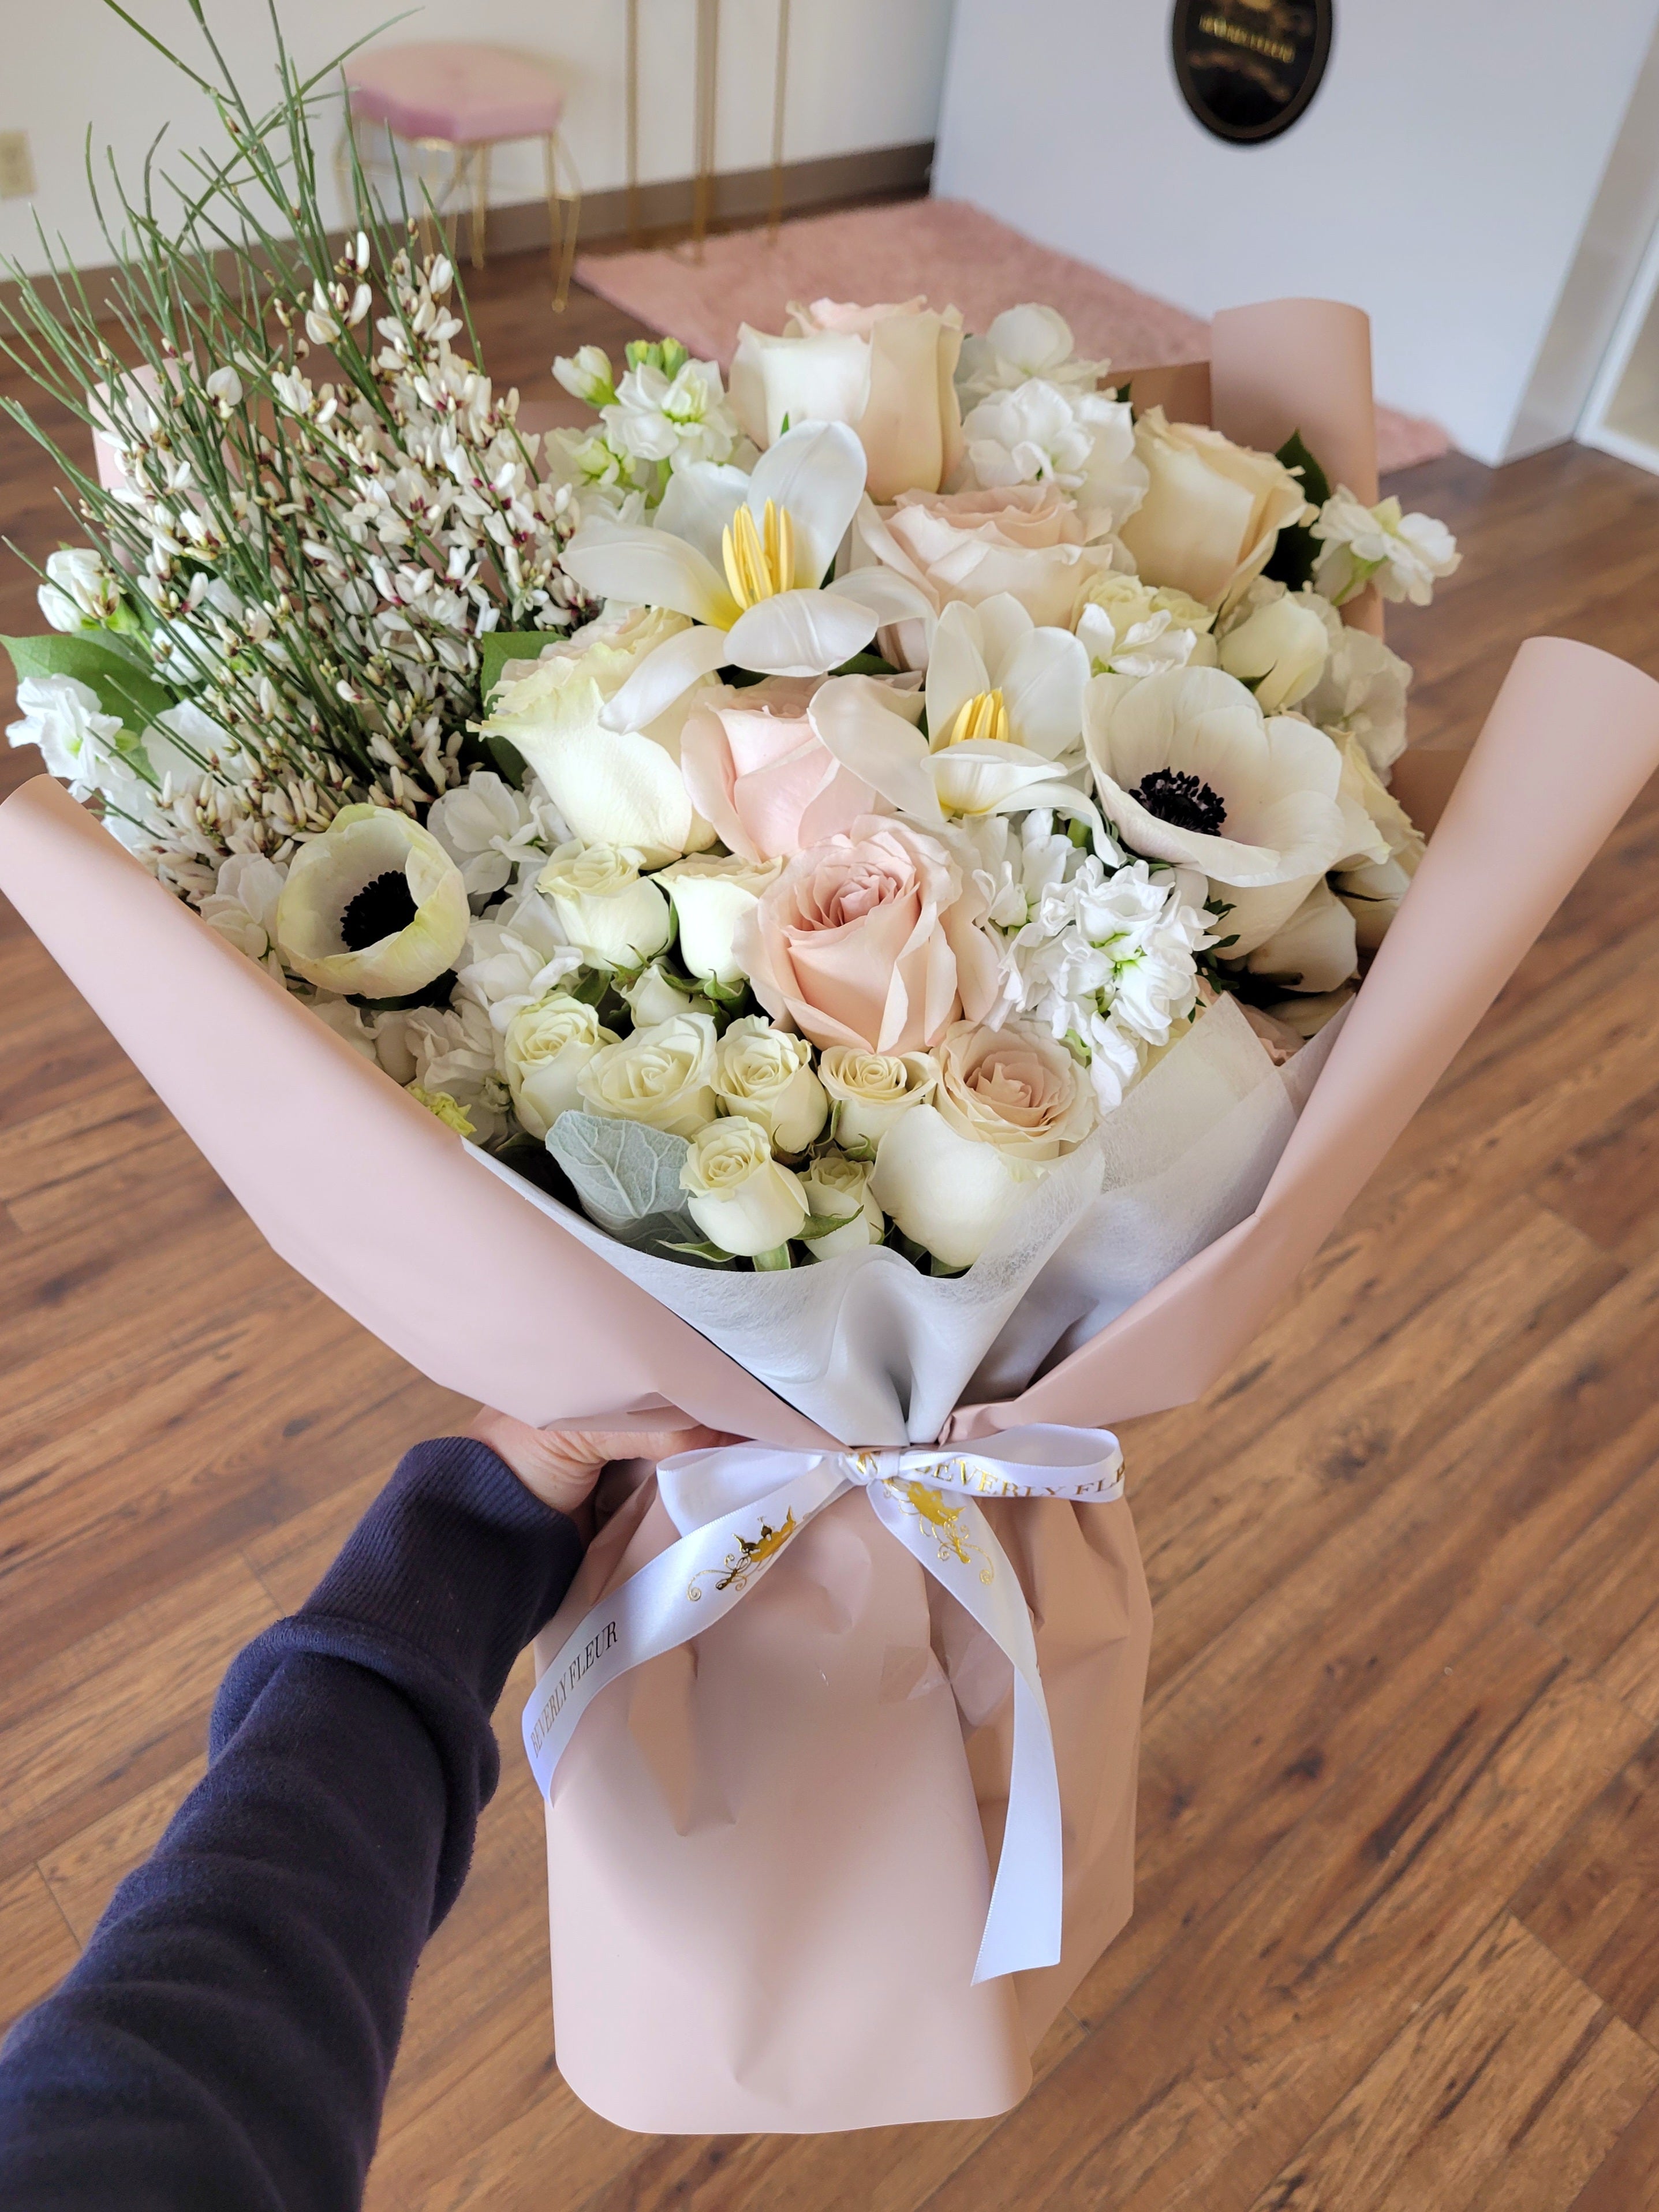 How To Wrap A Korean Styled Hand Bouquet